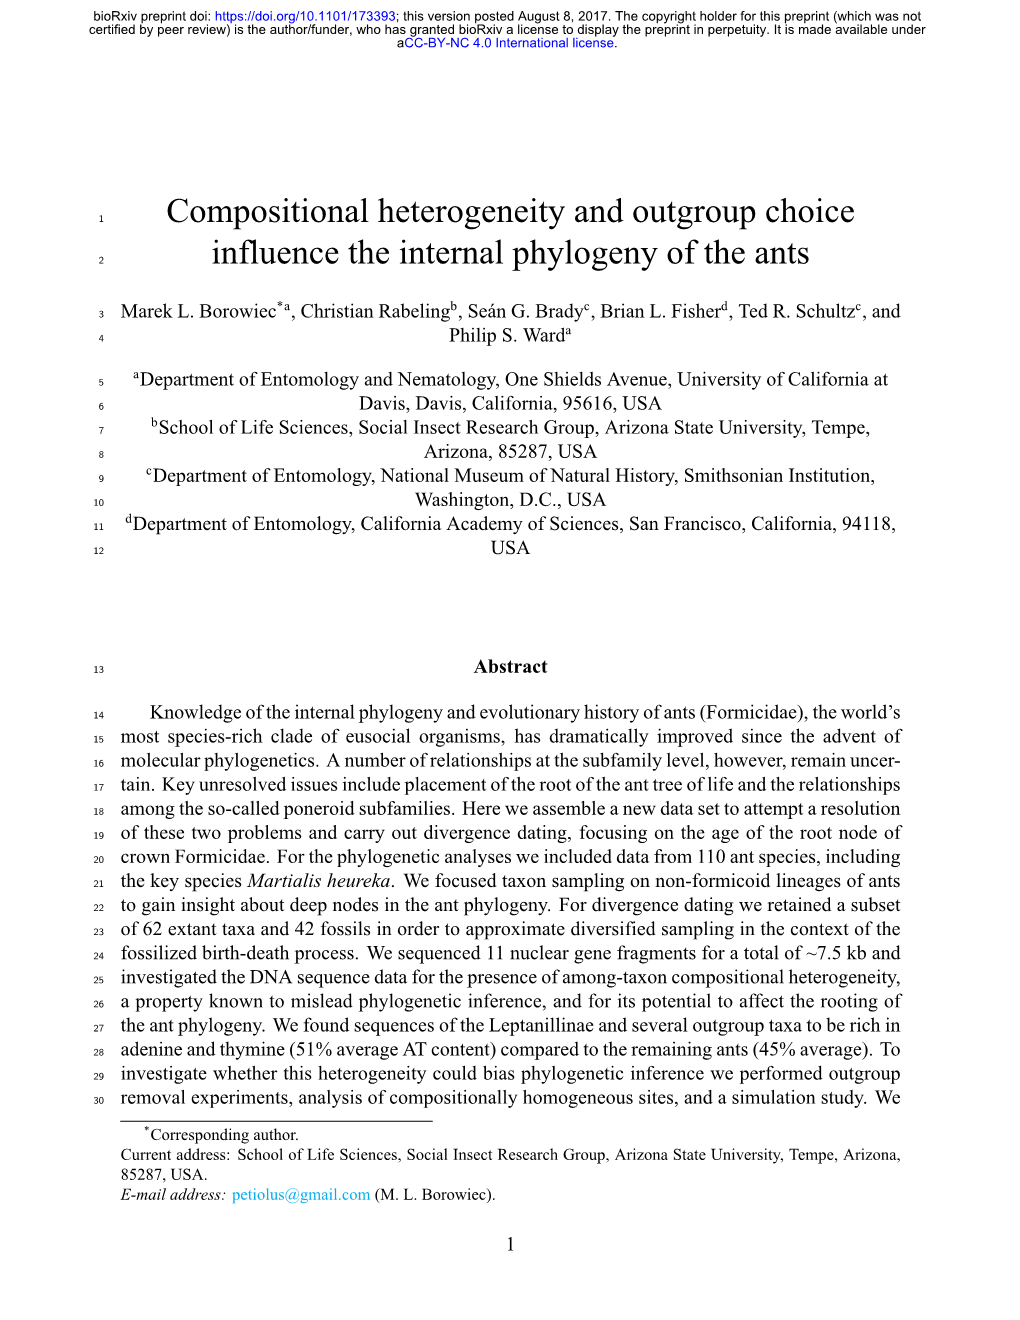 Compositional Heterogeneity and Outgroup Choice Influence the Internal Phylogeny of the Ants